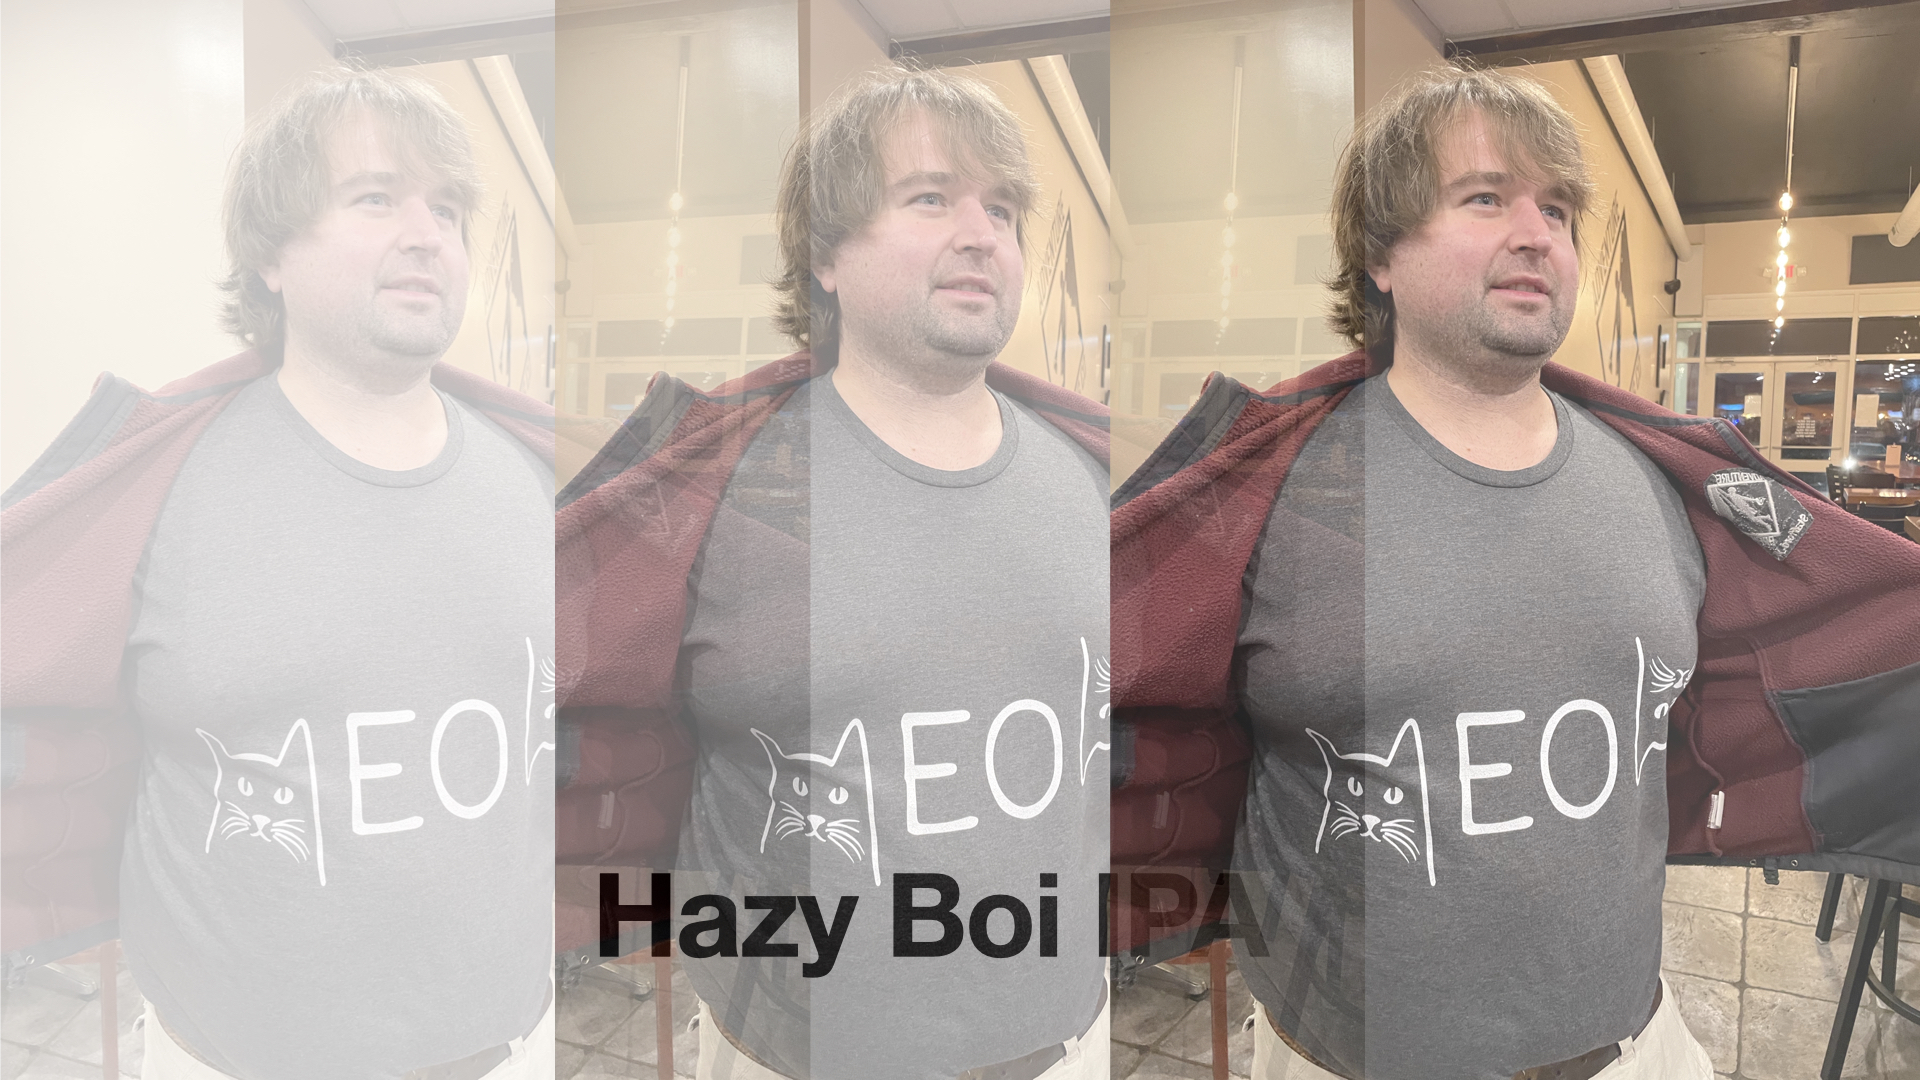 Justin pictured for Hazy BOI IPA